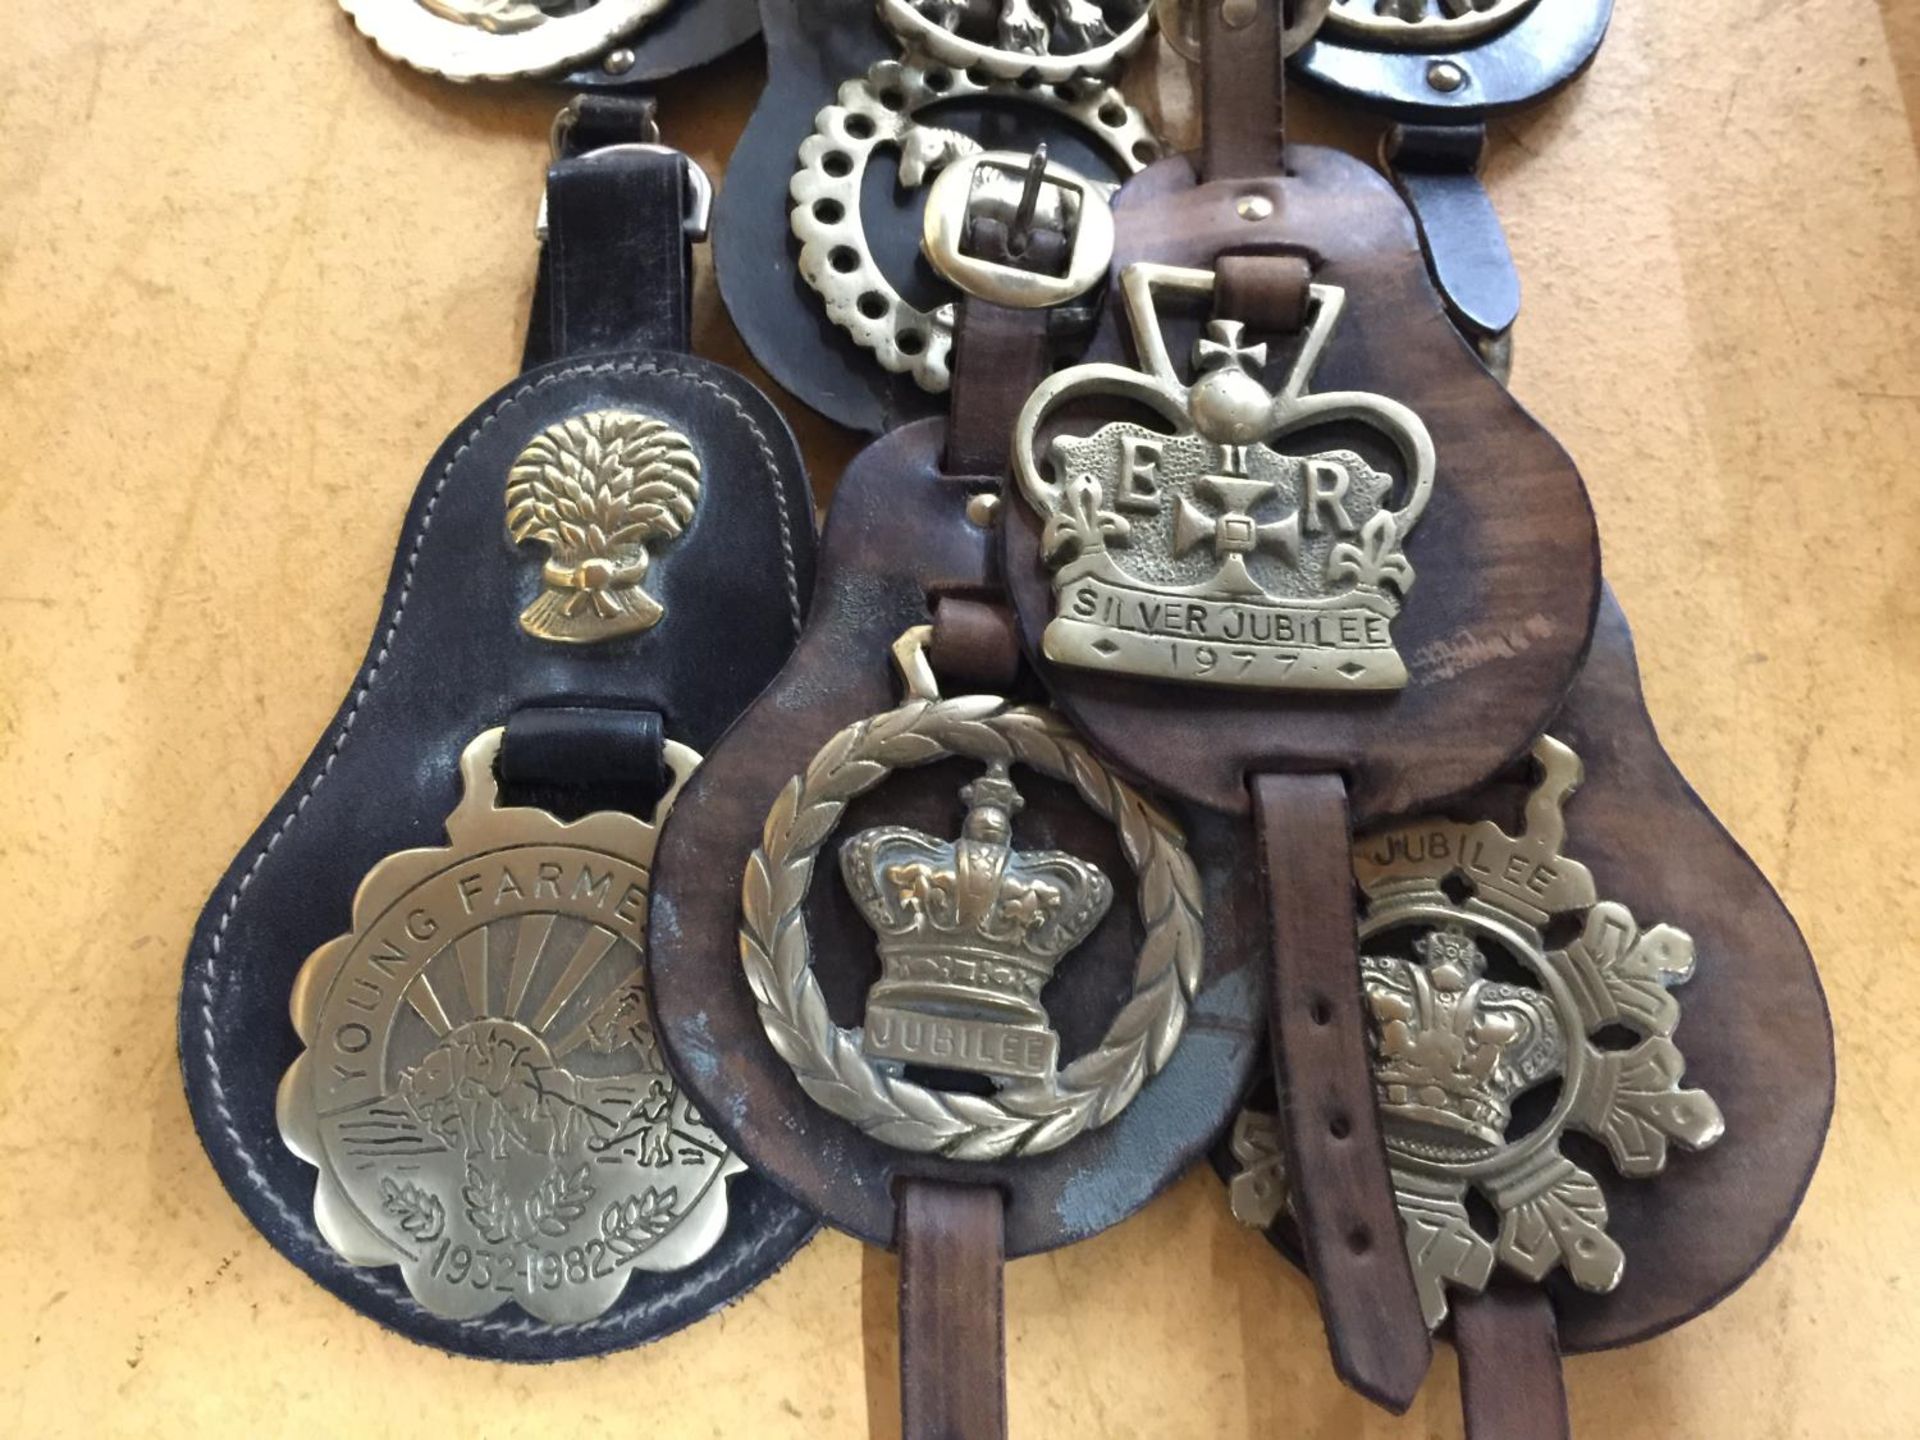 A COLLECTION OF HORSE BRASSES TO INCLUDE YOUNG FARMERS, SILVER JUBILEE, JOHN PEEL, ETC - Image 2 of 3